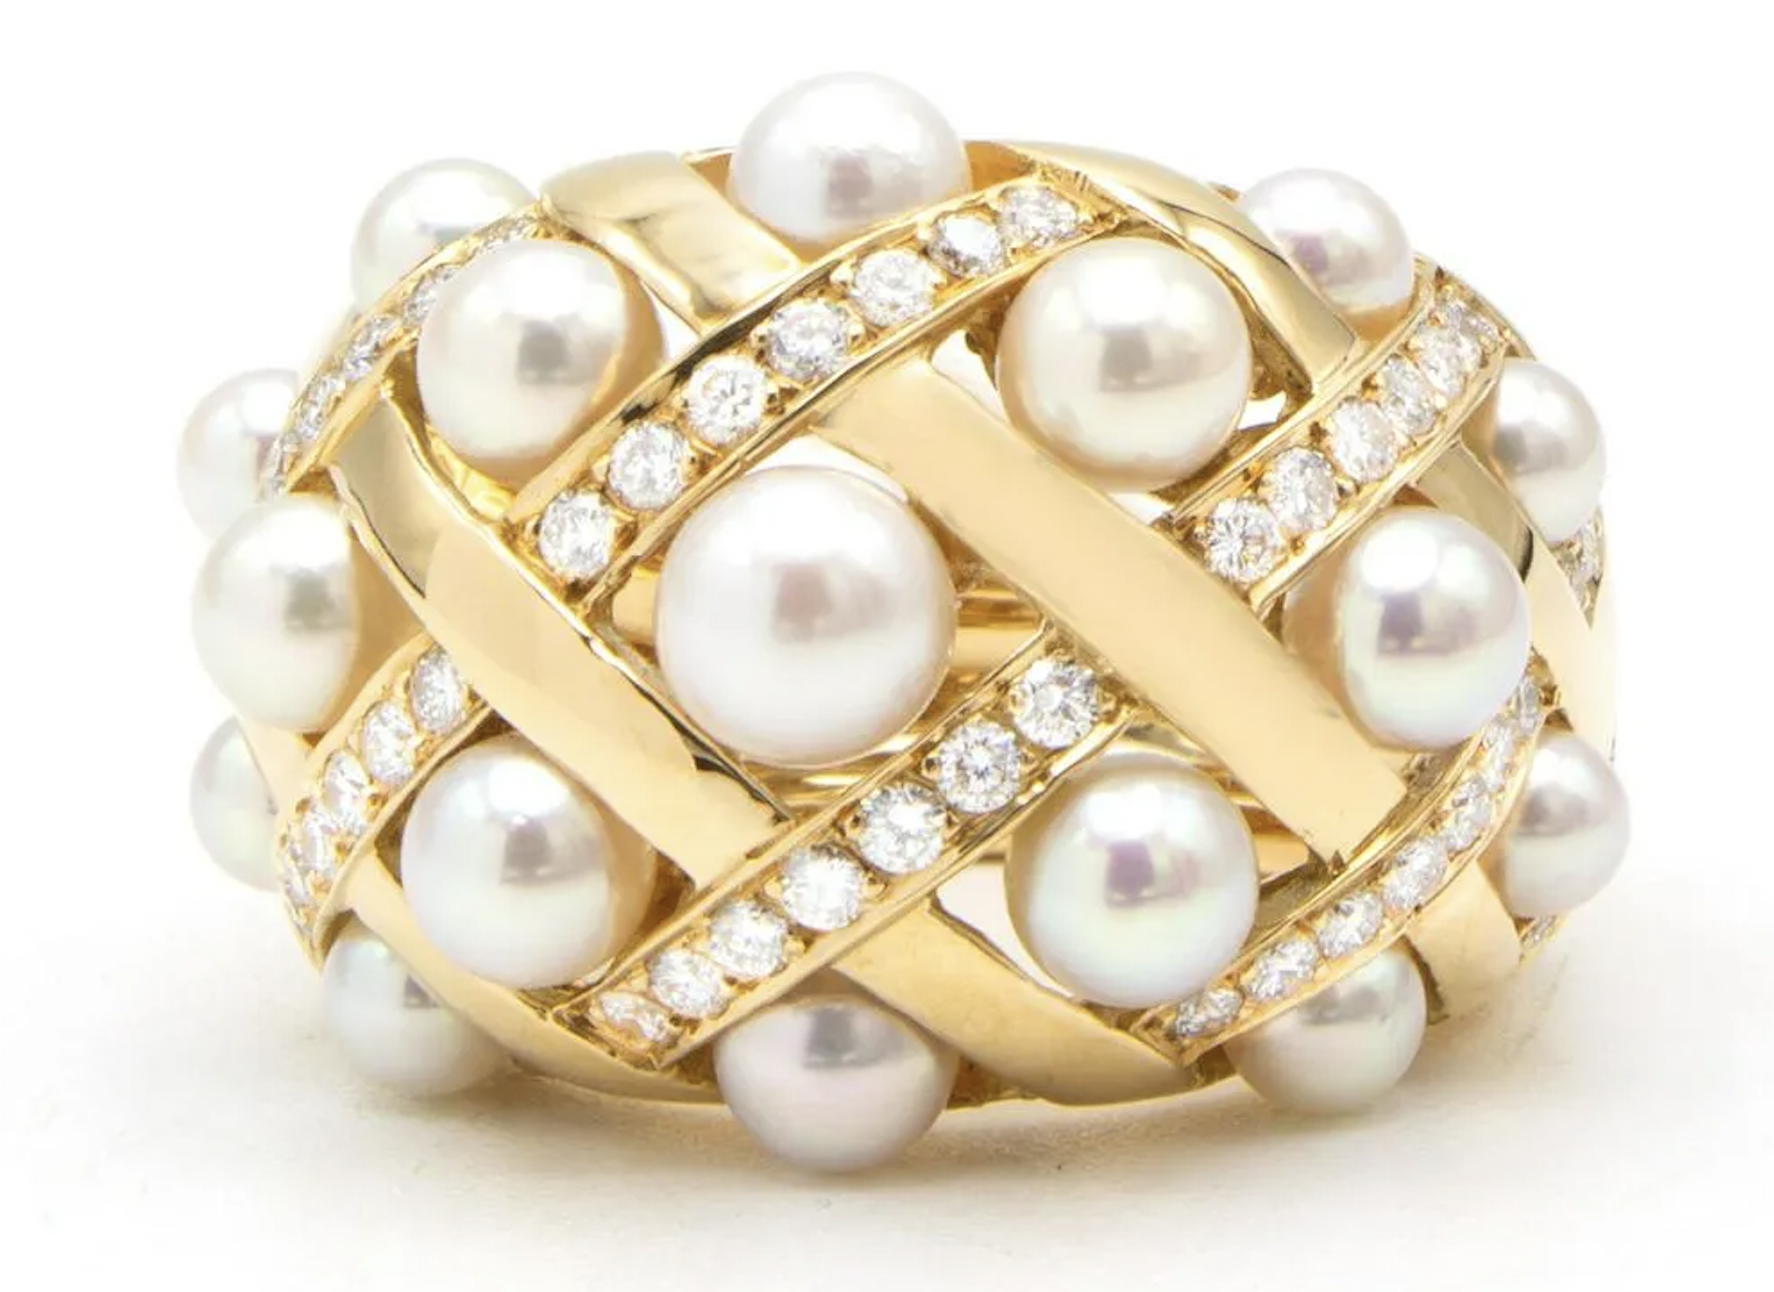 Chanel Baroque gold and cultured pearl ring, est. $9,000-$11,000